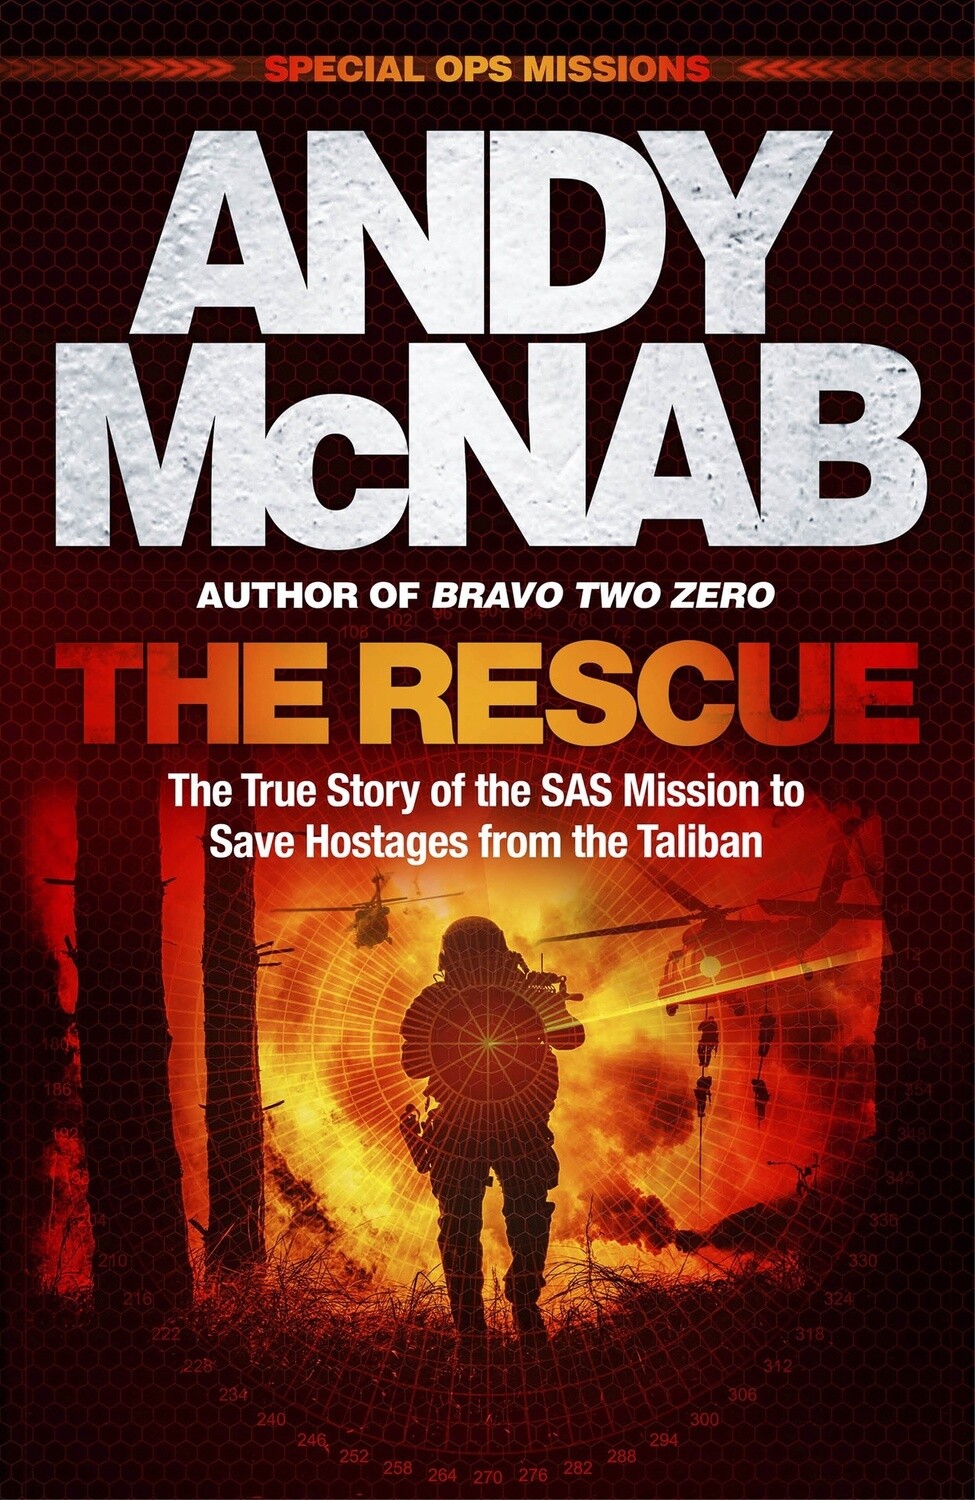 The Rescue by Andy McNab